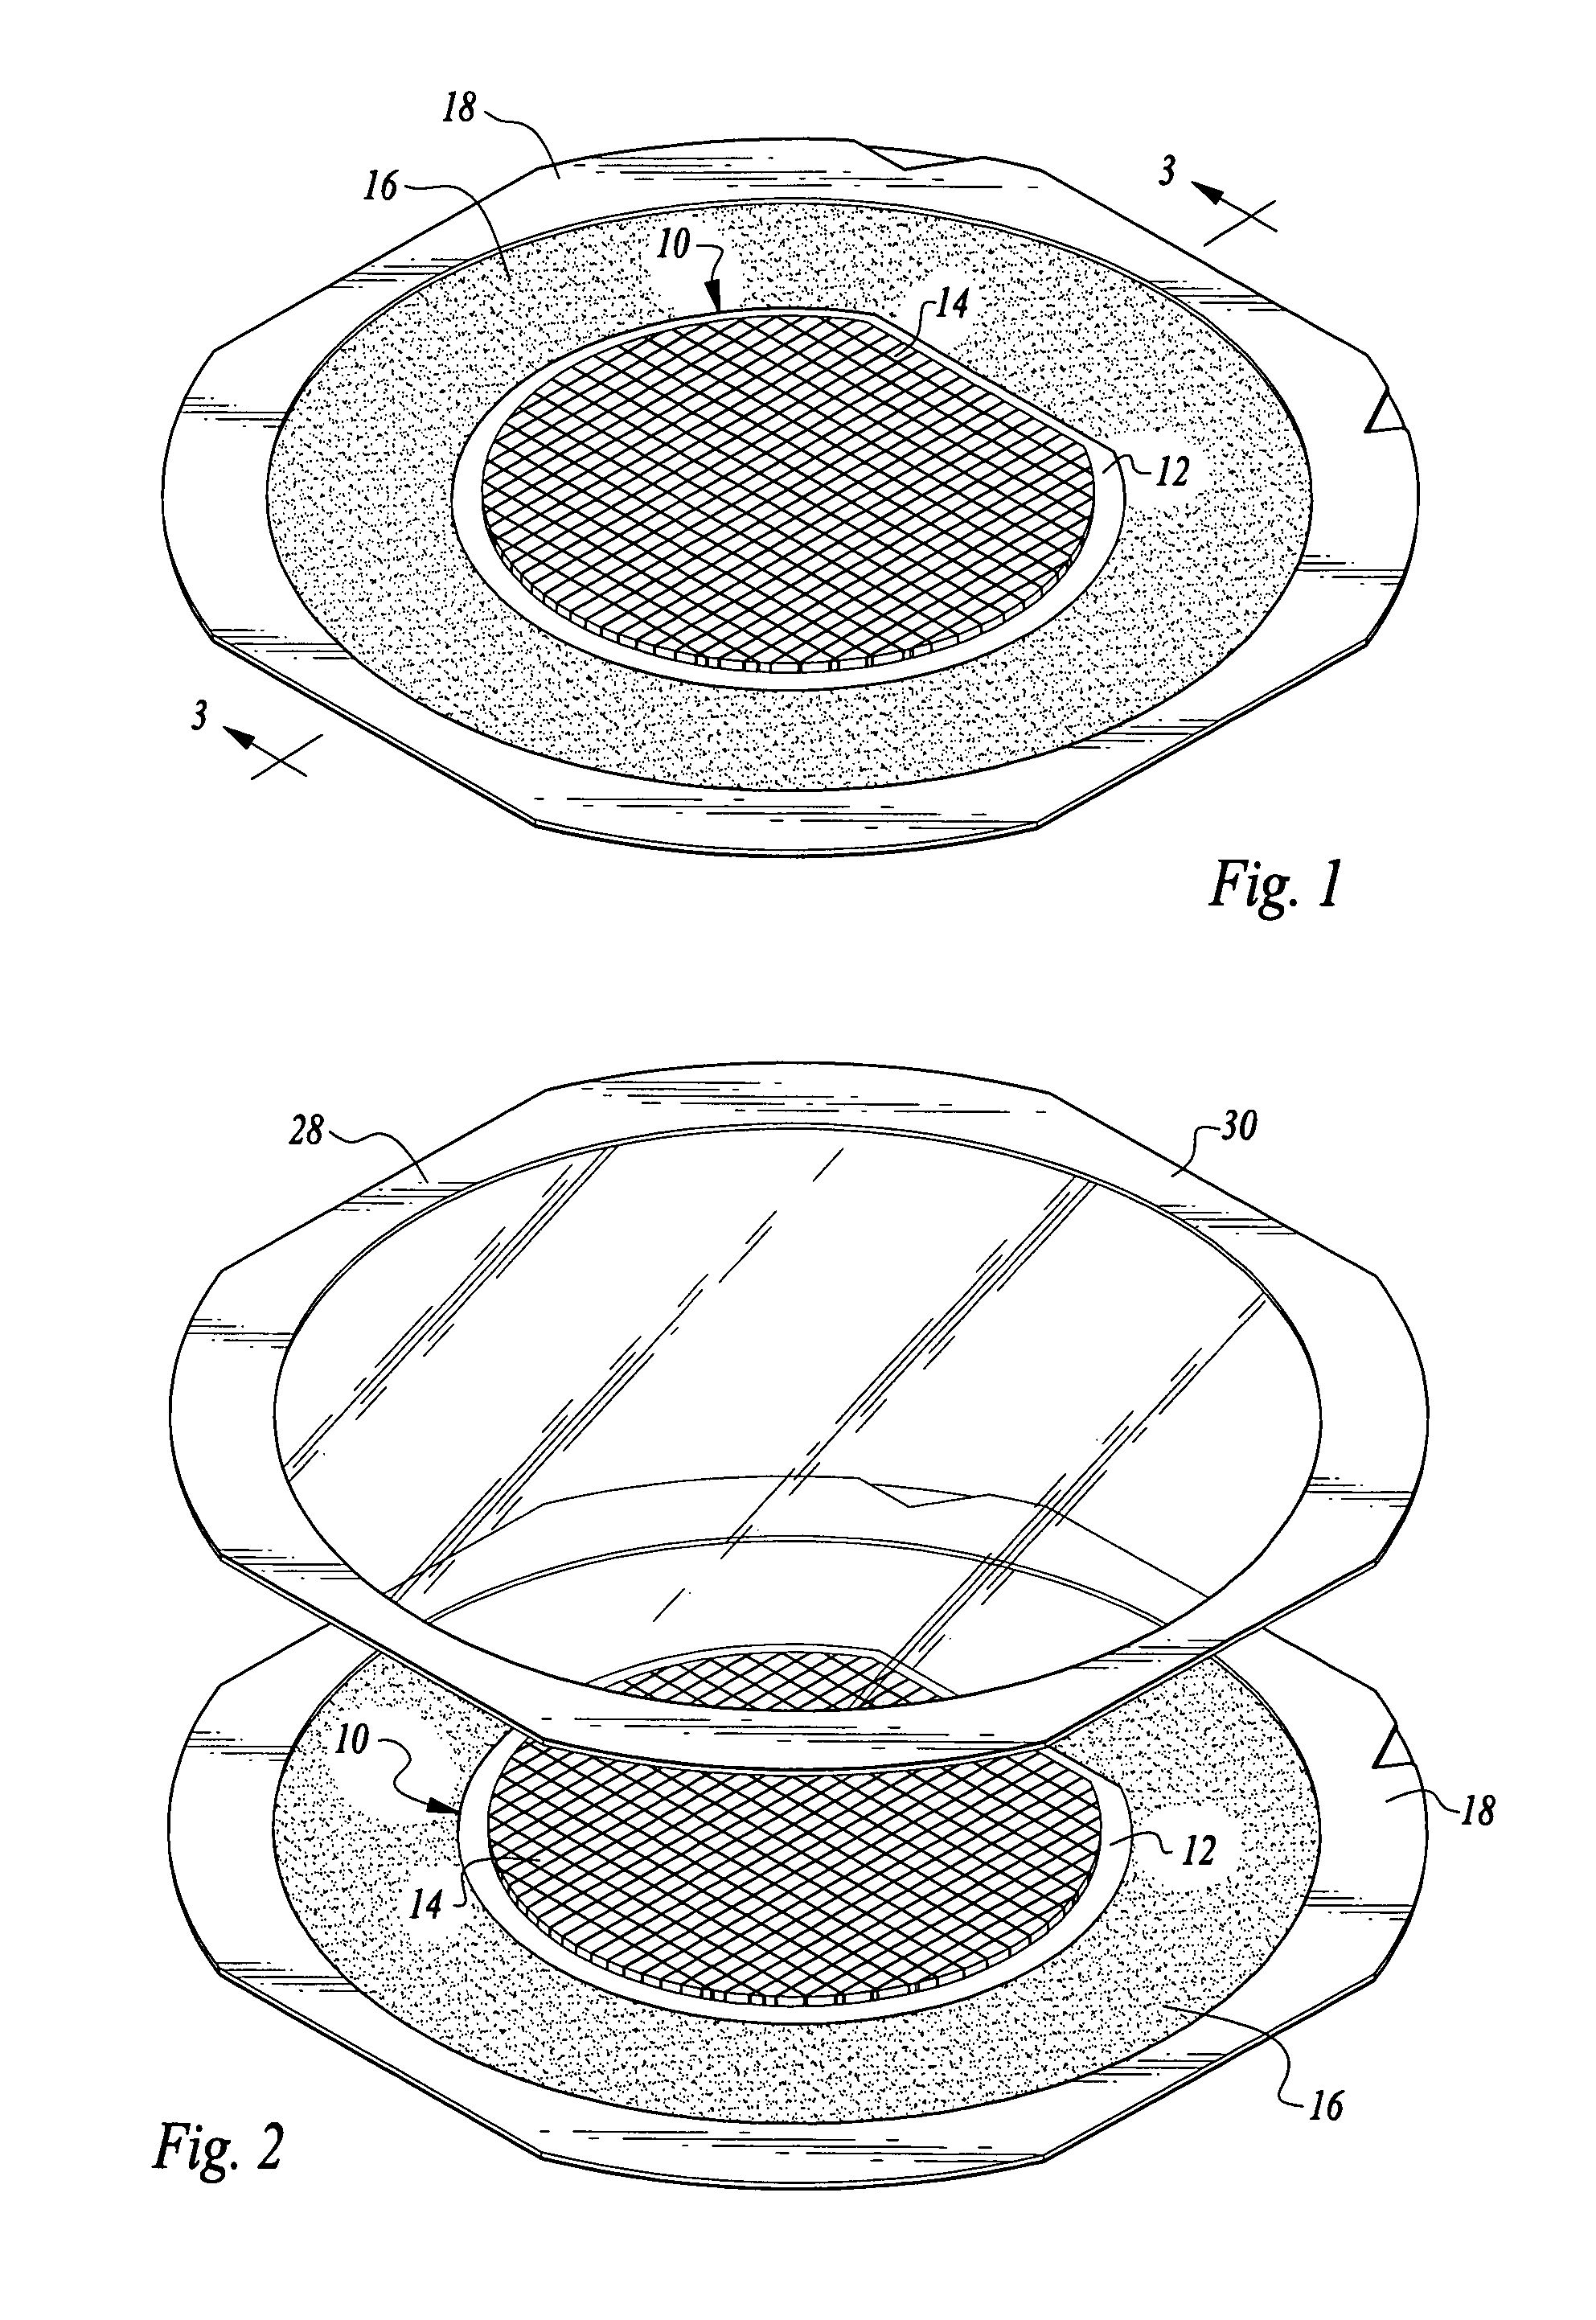 Method of removing back metal from an etched semiconductor scribe street